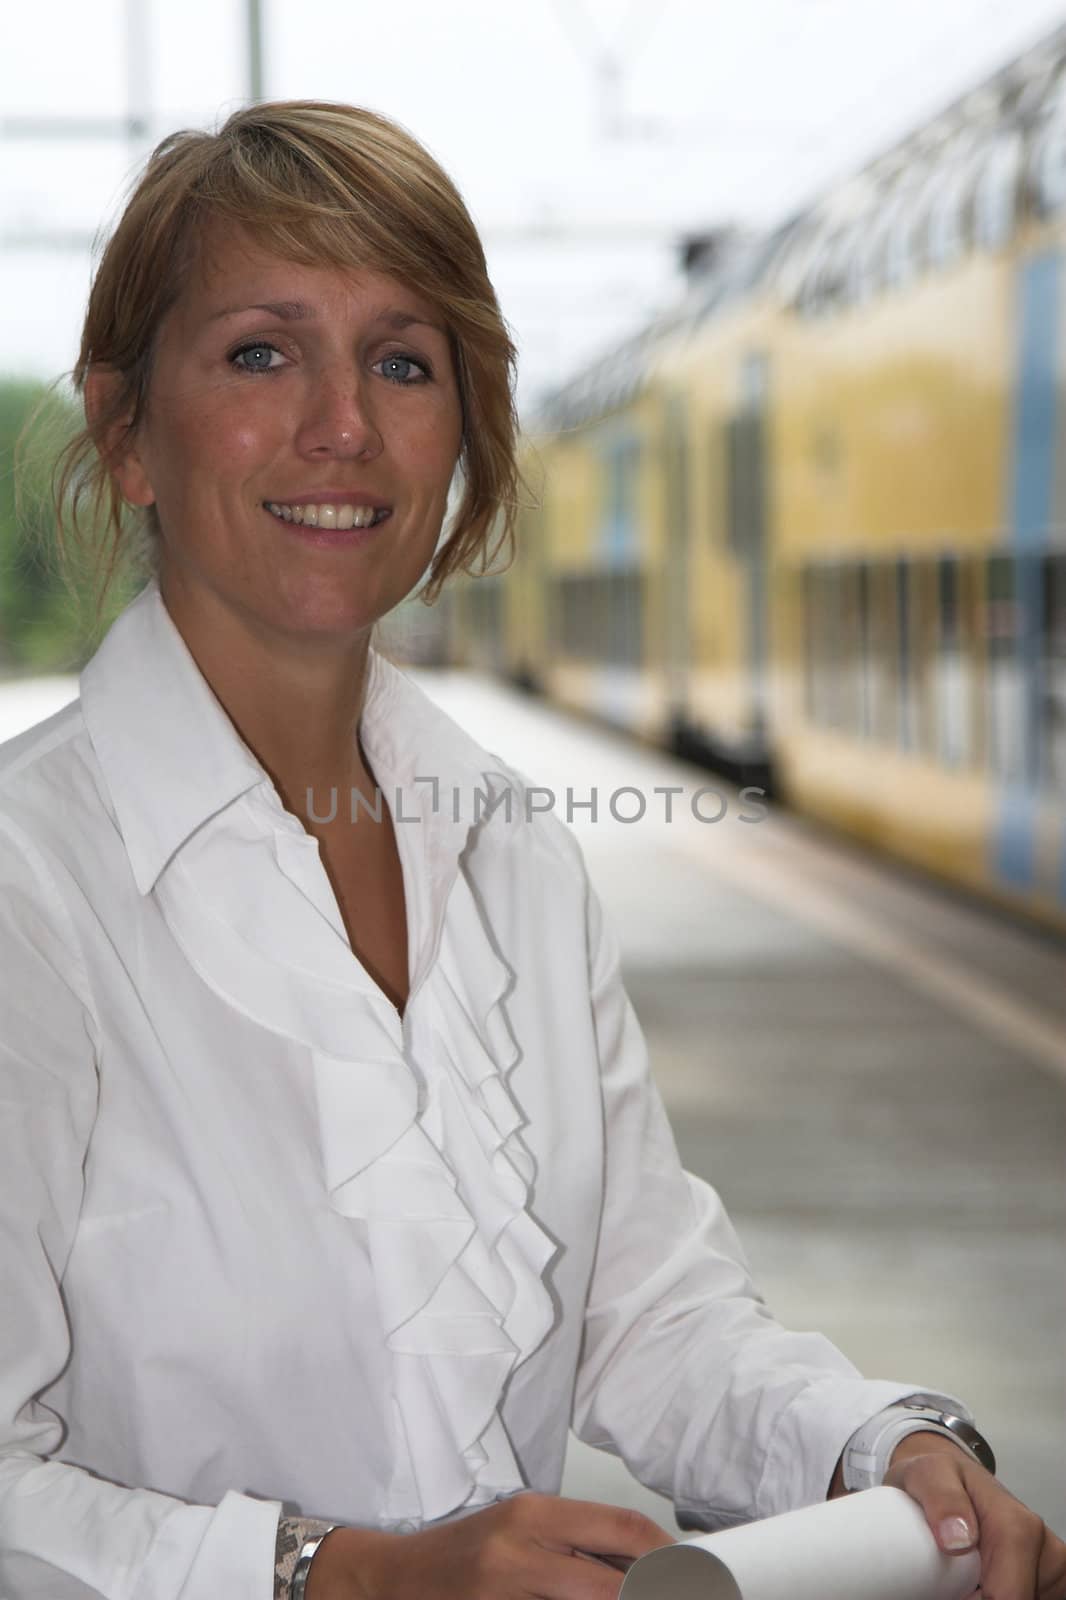 Pretty businesswoman waiting for the train to arrive